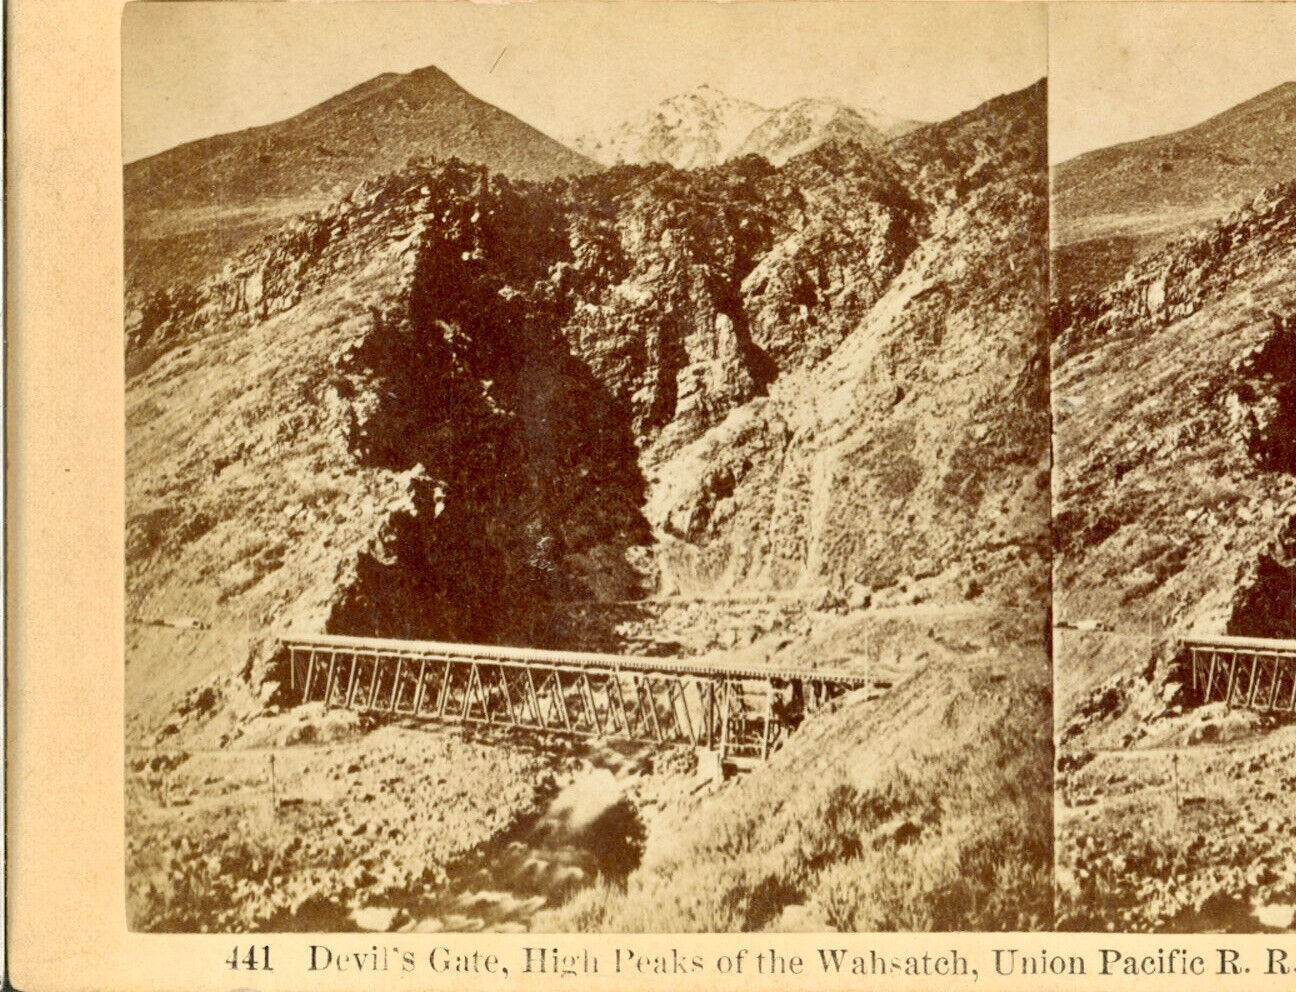 UTAH, Devil\'s Gate, Peaks of the Wahsatch, Union Pacific R.R.--Stereoview F111